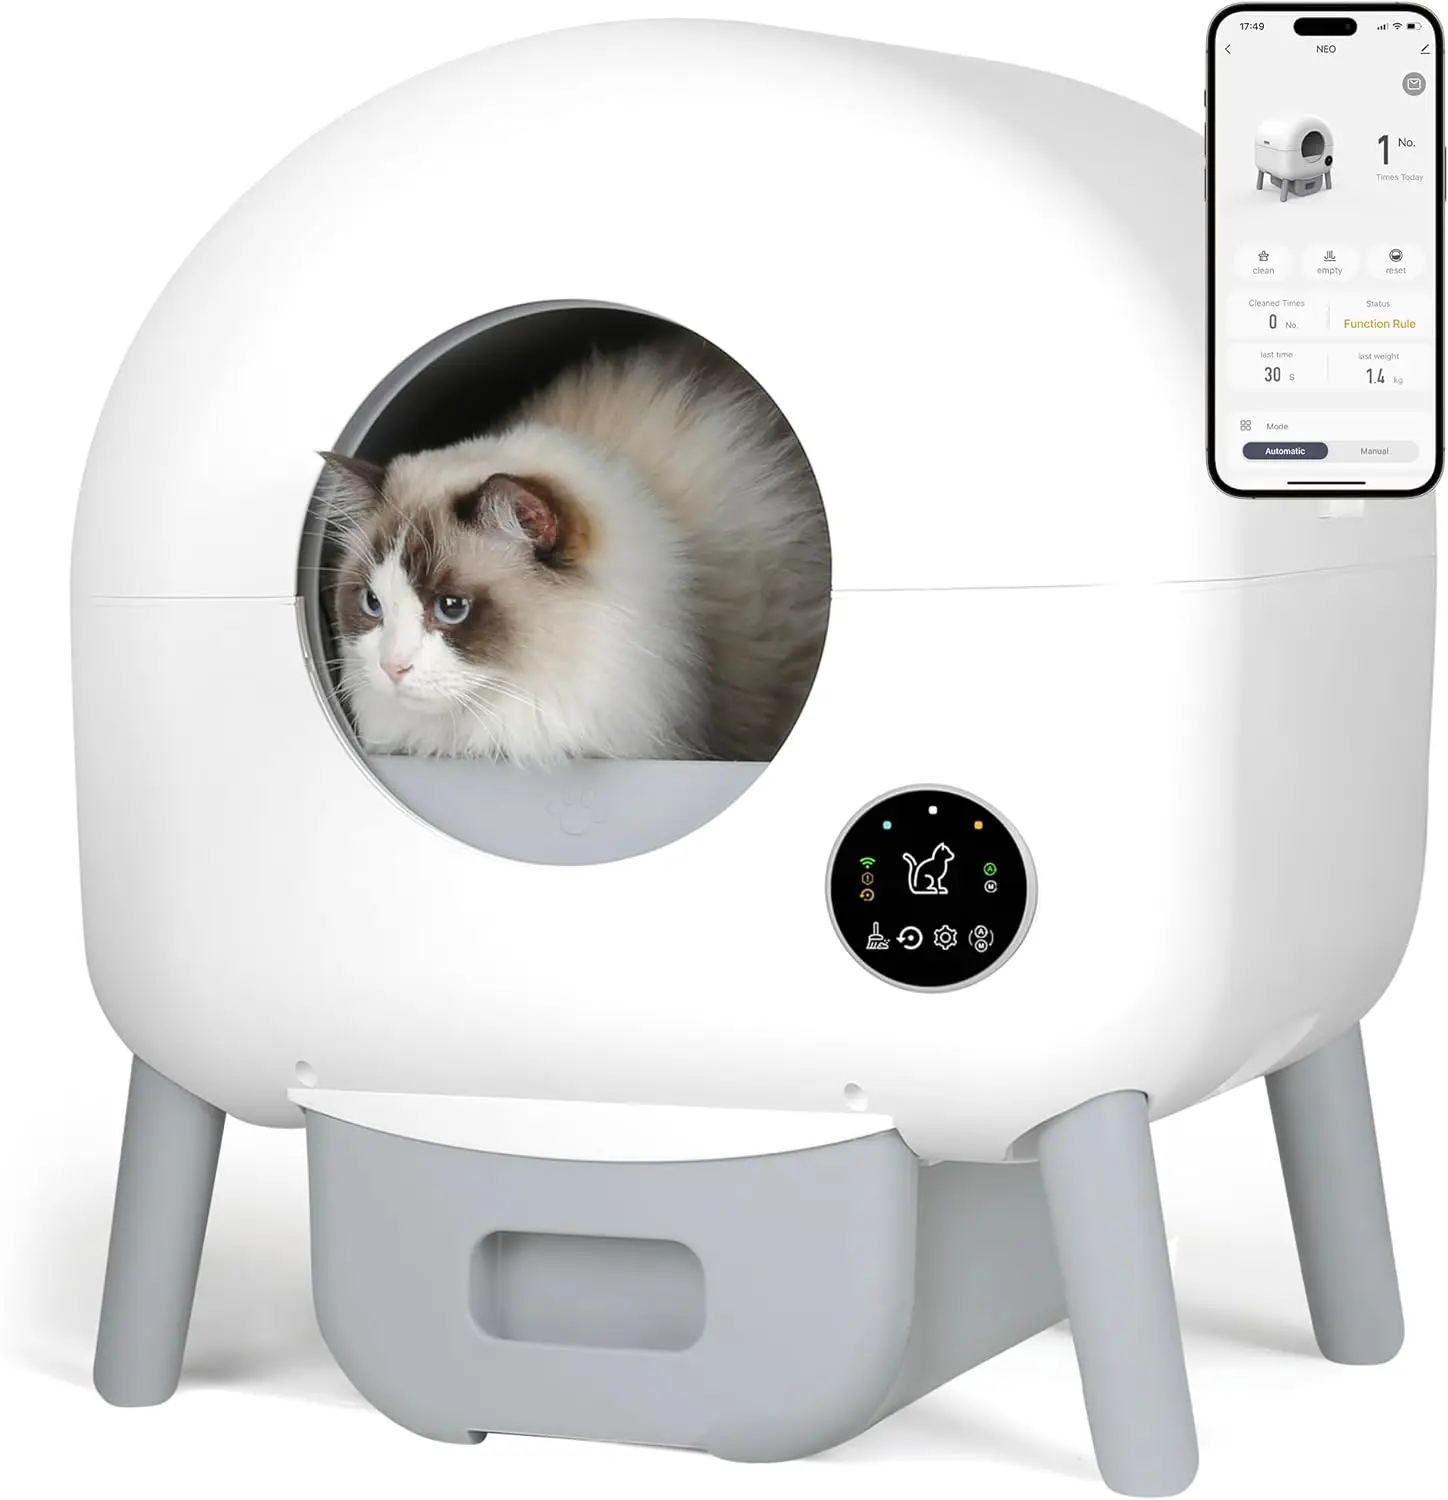 

76L Smart Automatic Self Cleaning Litter Box Large Space Sandbox For Cat Fully Enclosed Litter Box With APP Control Pet Toilet